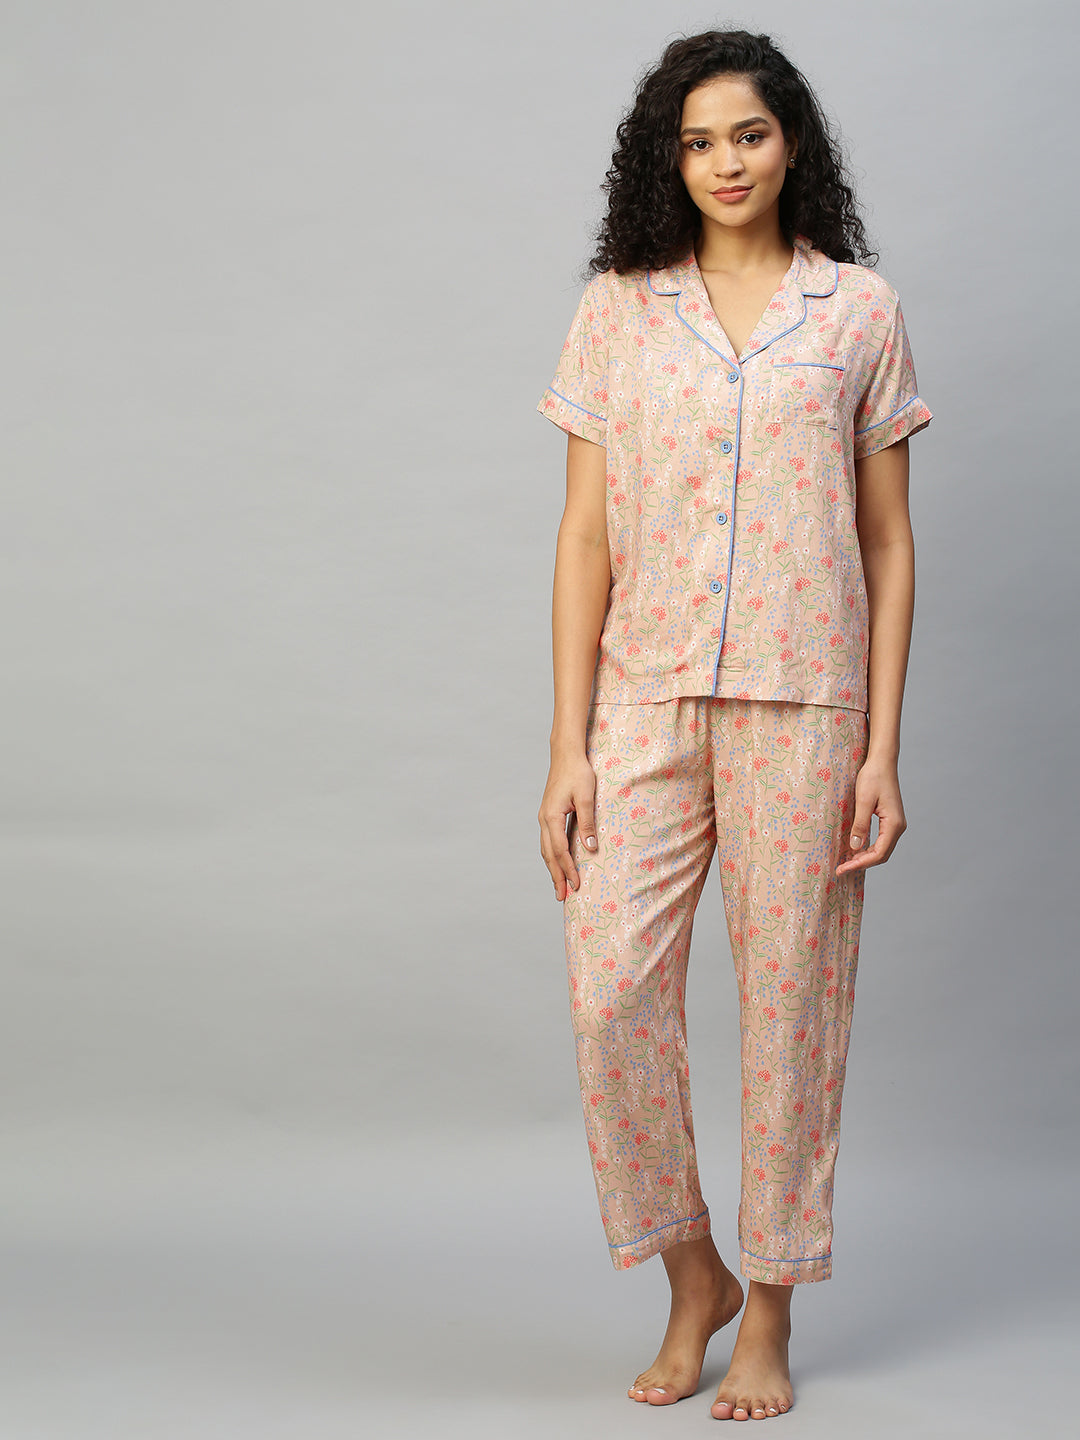 Floral Printed Rayon Night Suit With Contrast Piping